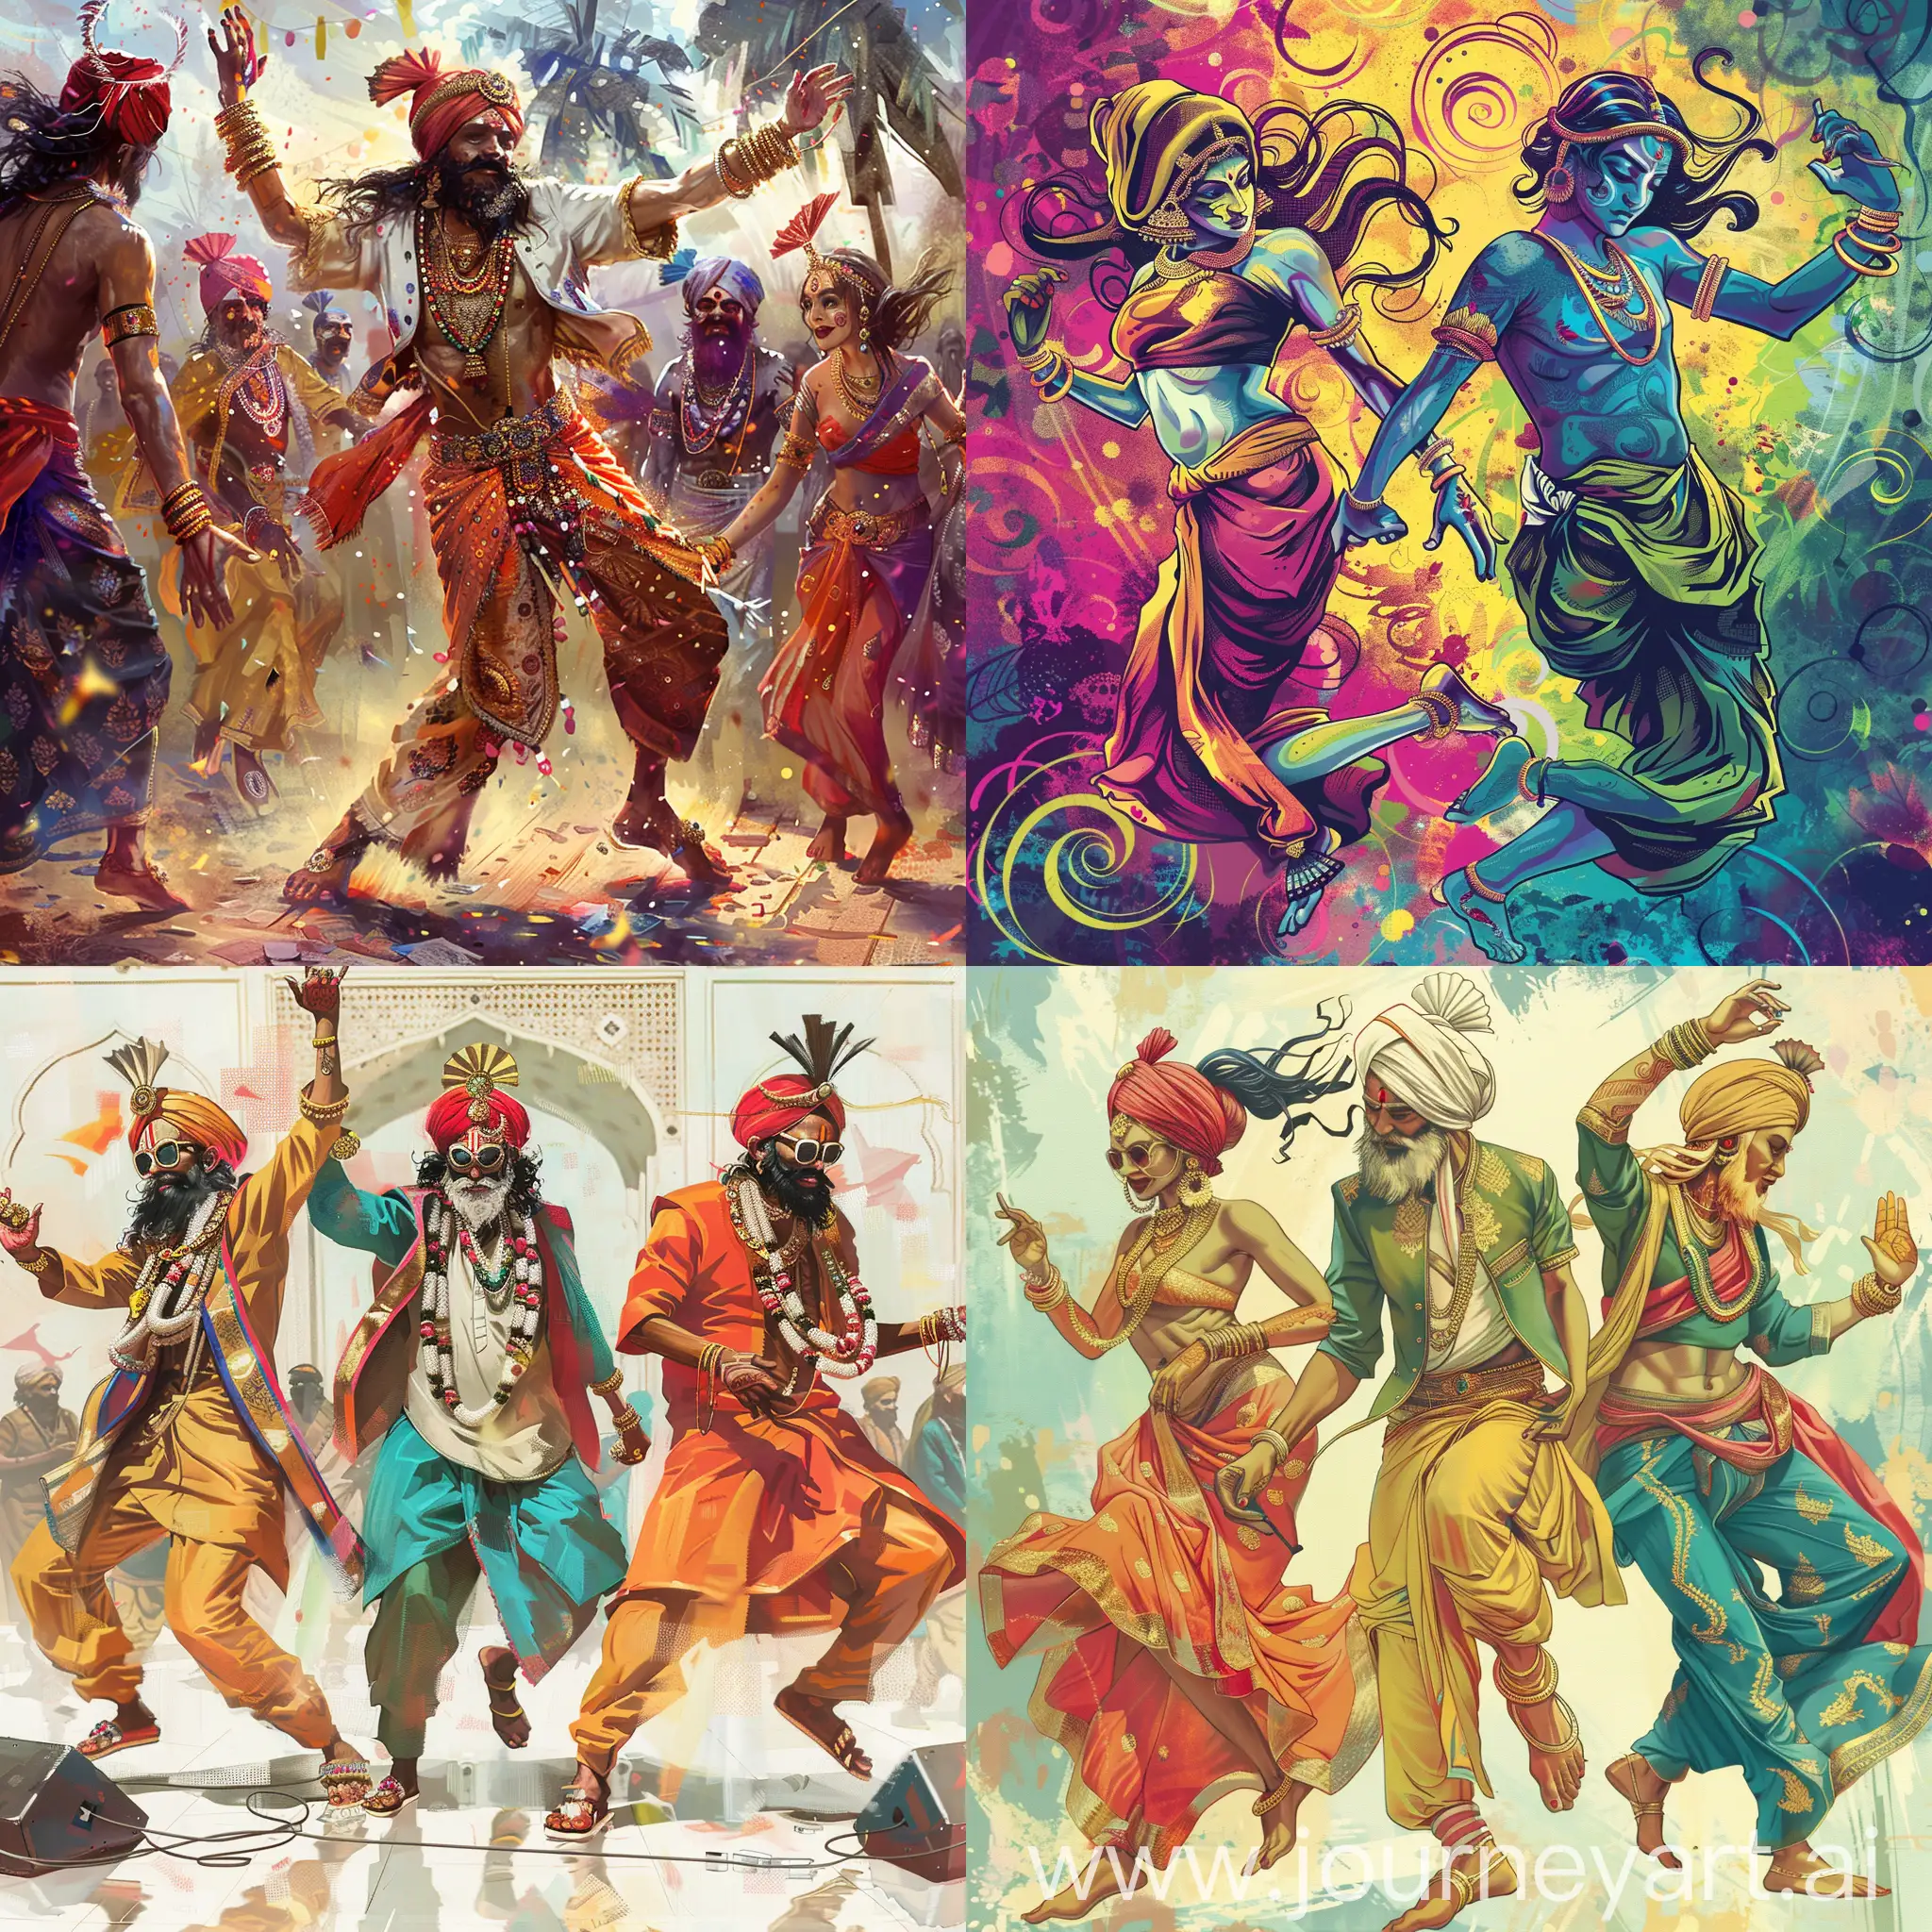 Indian-Gods-in-Stylish-Garb-Dance-to-Deep-House-Music-at-the-Disco